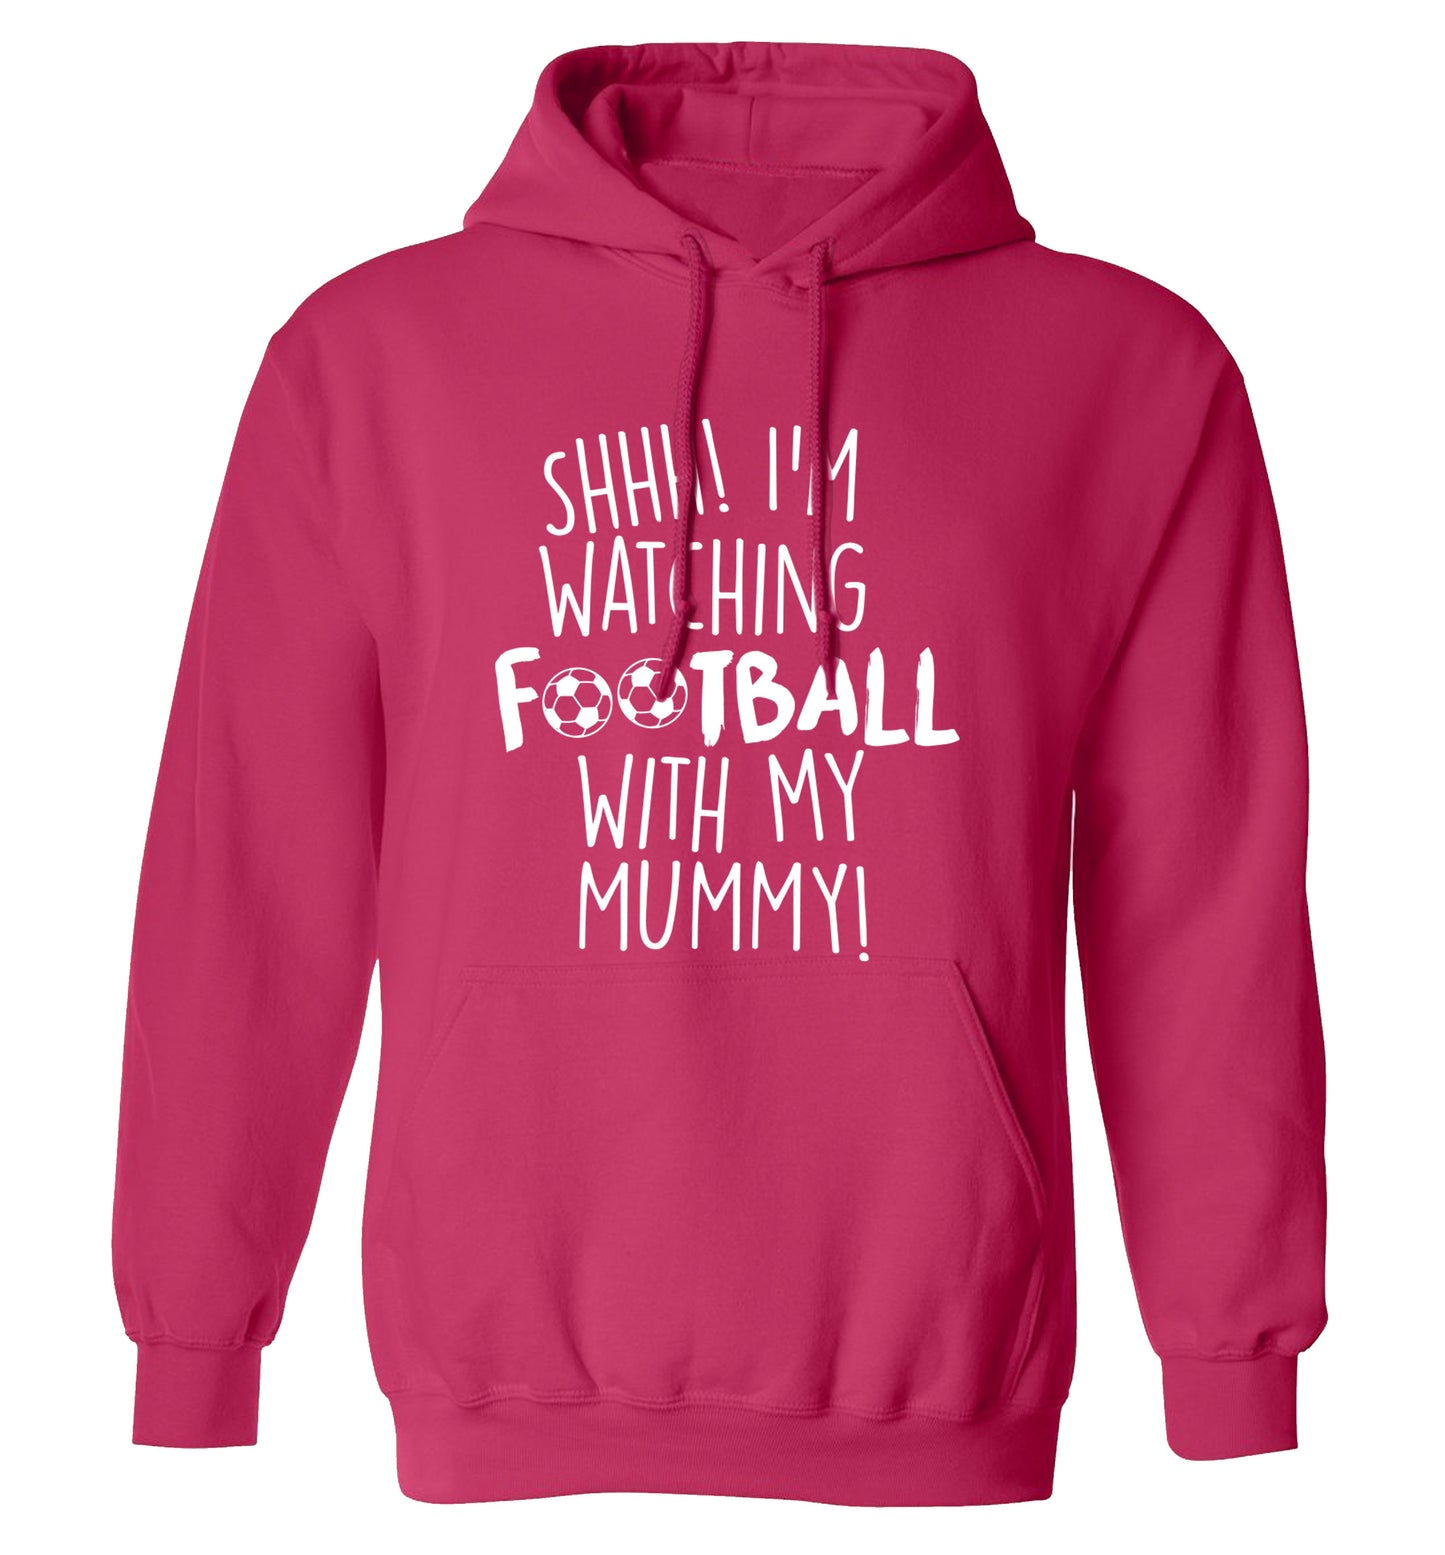 Shhh I'm watching football with my mummy adults unisexpink hoodie 2XL